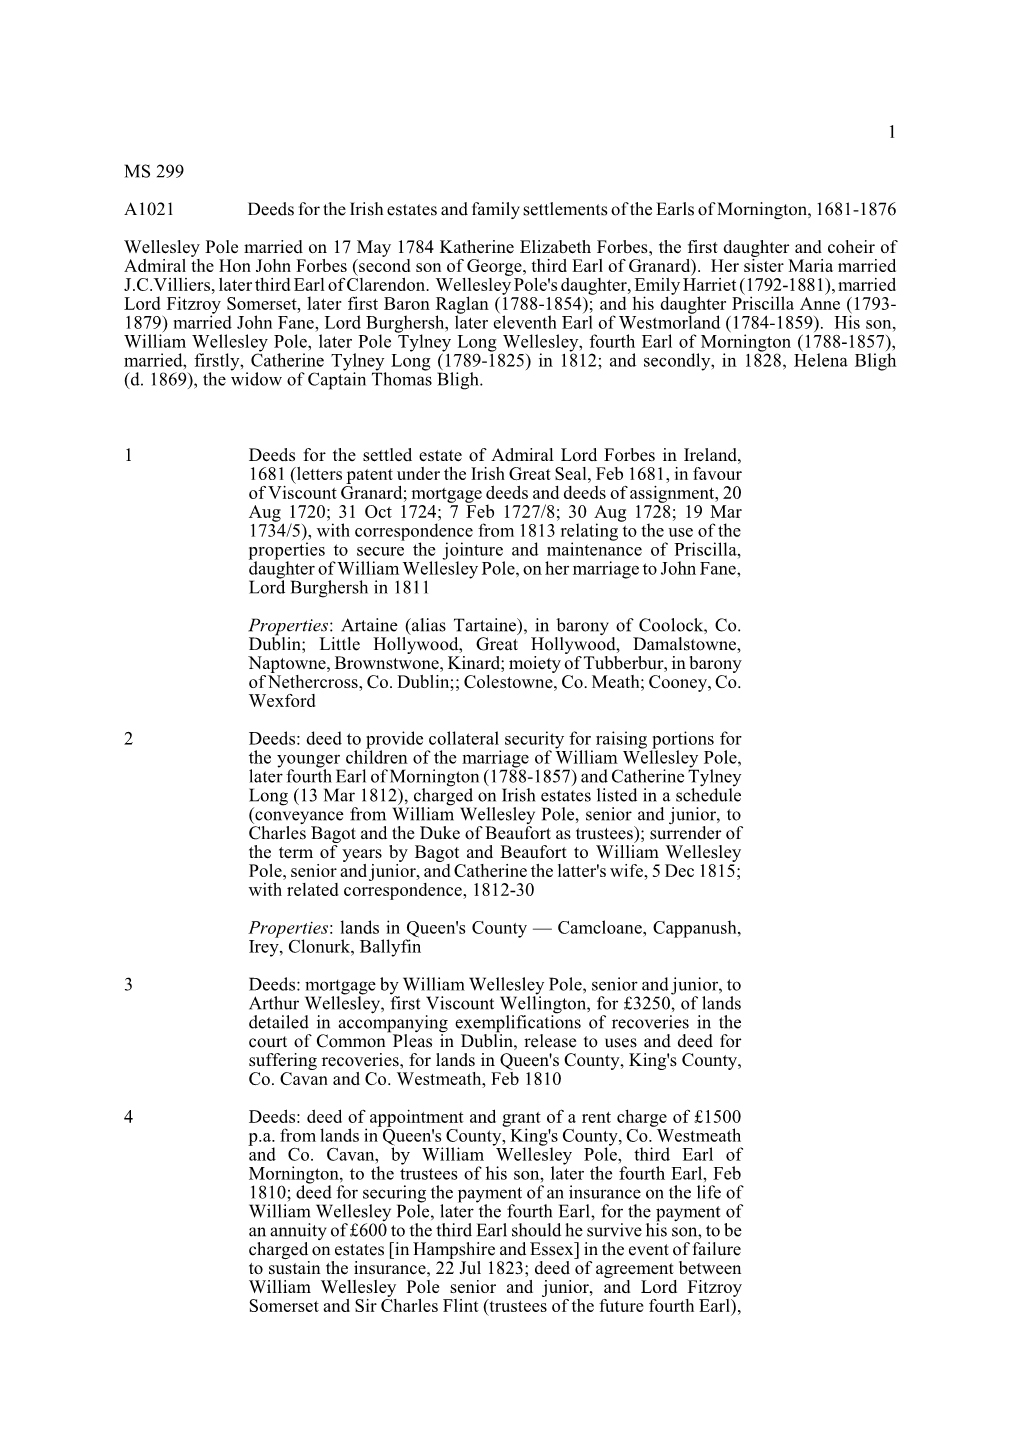 1 MS 299 A1021 Deeds for the Irish Estates and Family Settlements Of